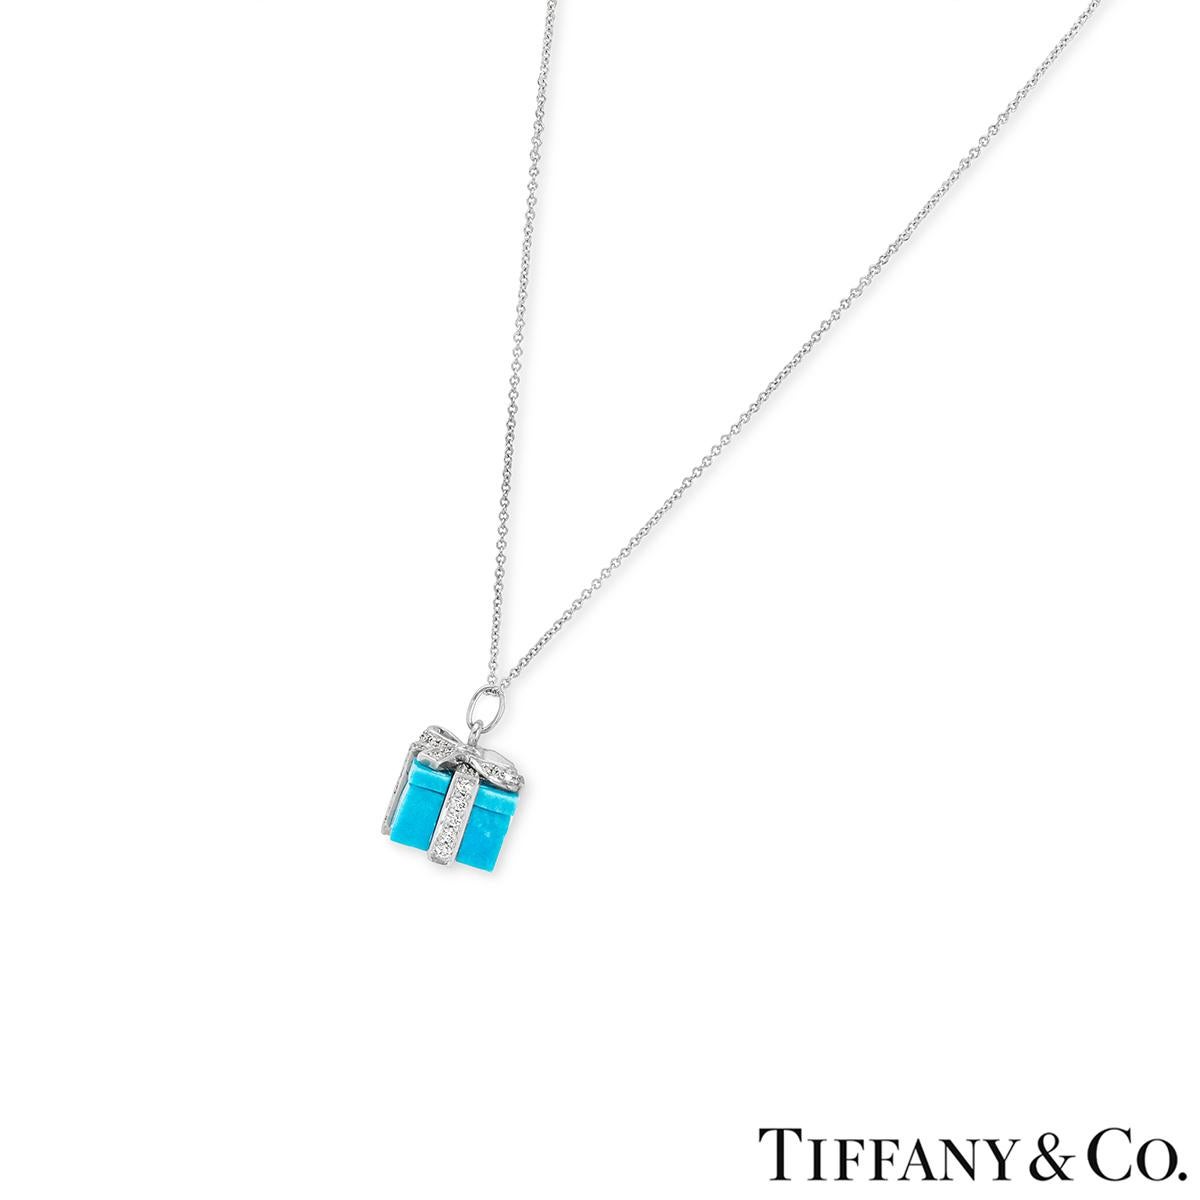 A charming platinum turquoise and diamond pendant by Tiffany & Co. The pendant comprises of a gift motif carved from vibrant turquoise and adorned with a diamond set ribbon and bow. The ribbon and bow feature 58 round brilliant cut diamonds with an